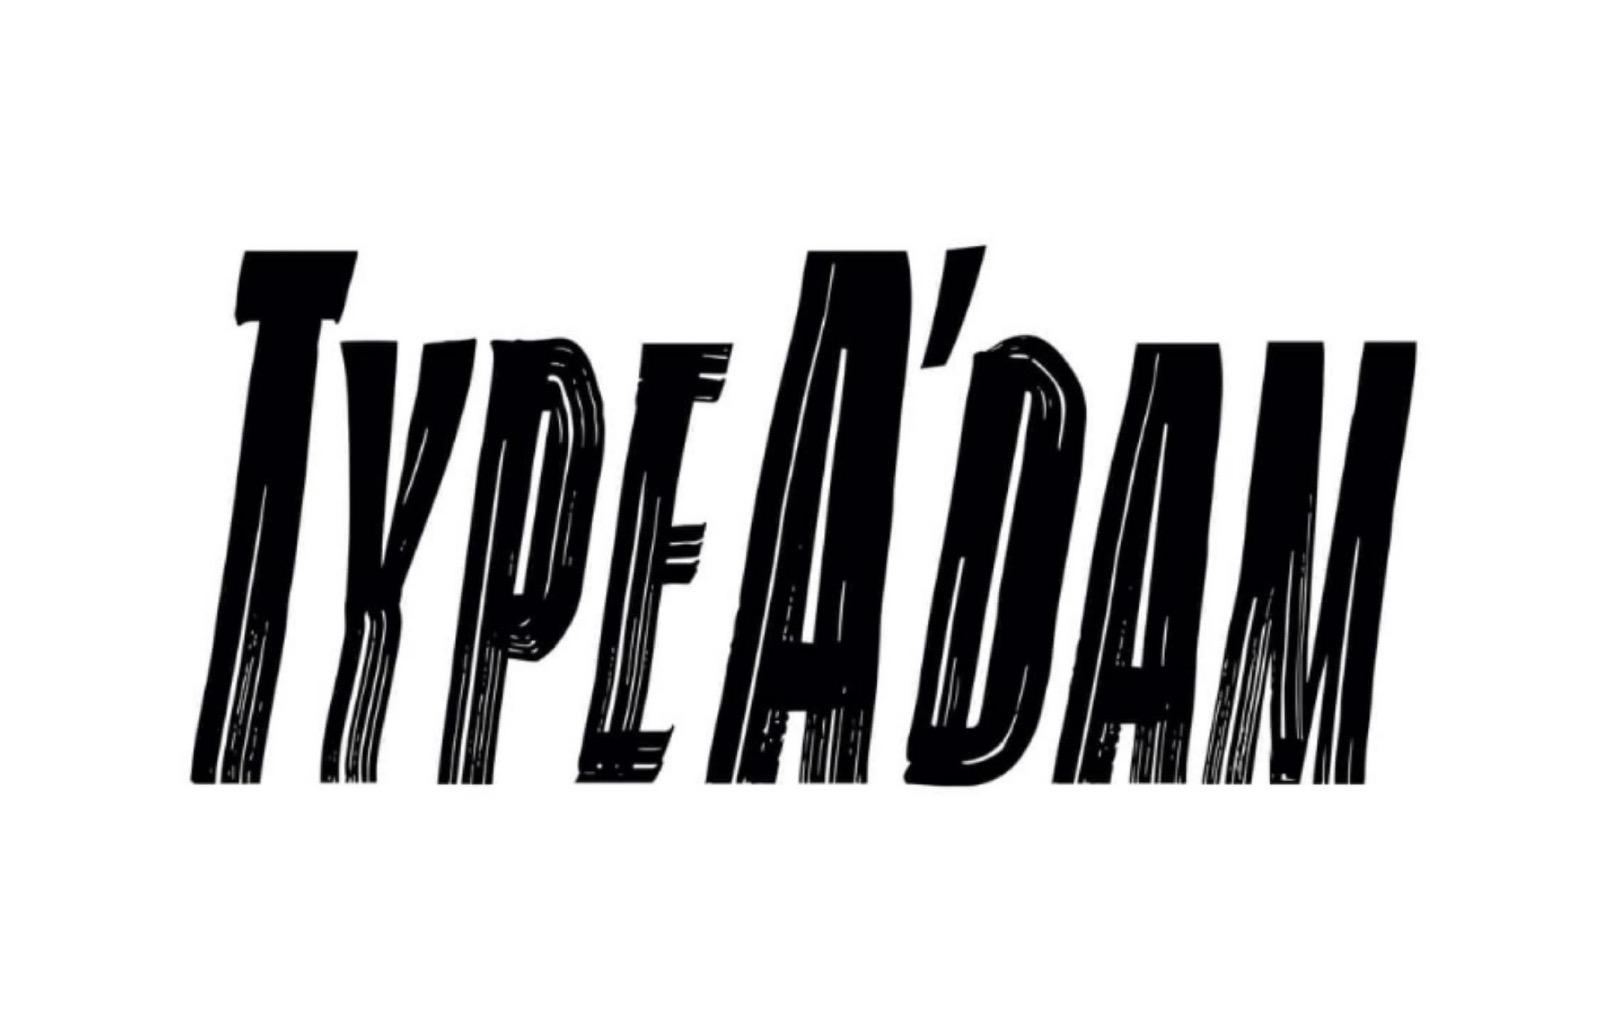 More information about "TypeAmsterdam on May 11"